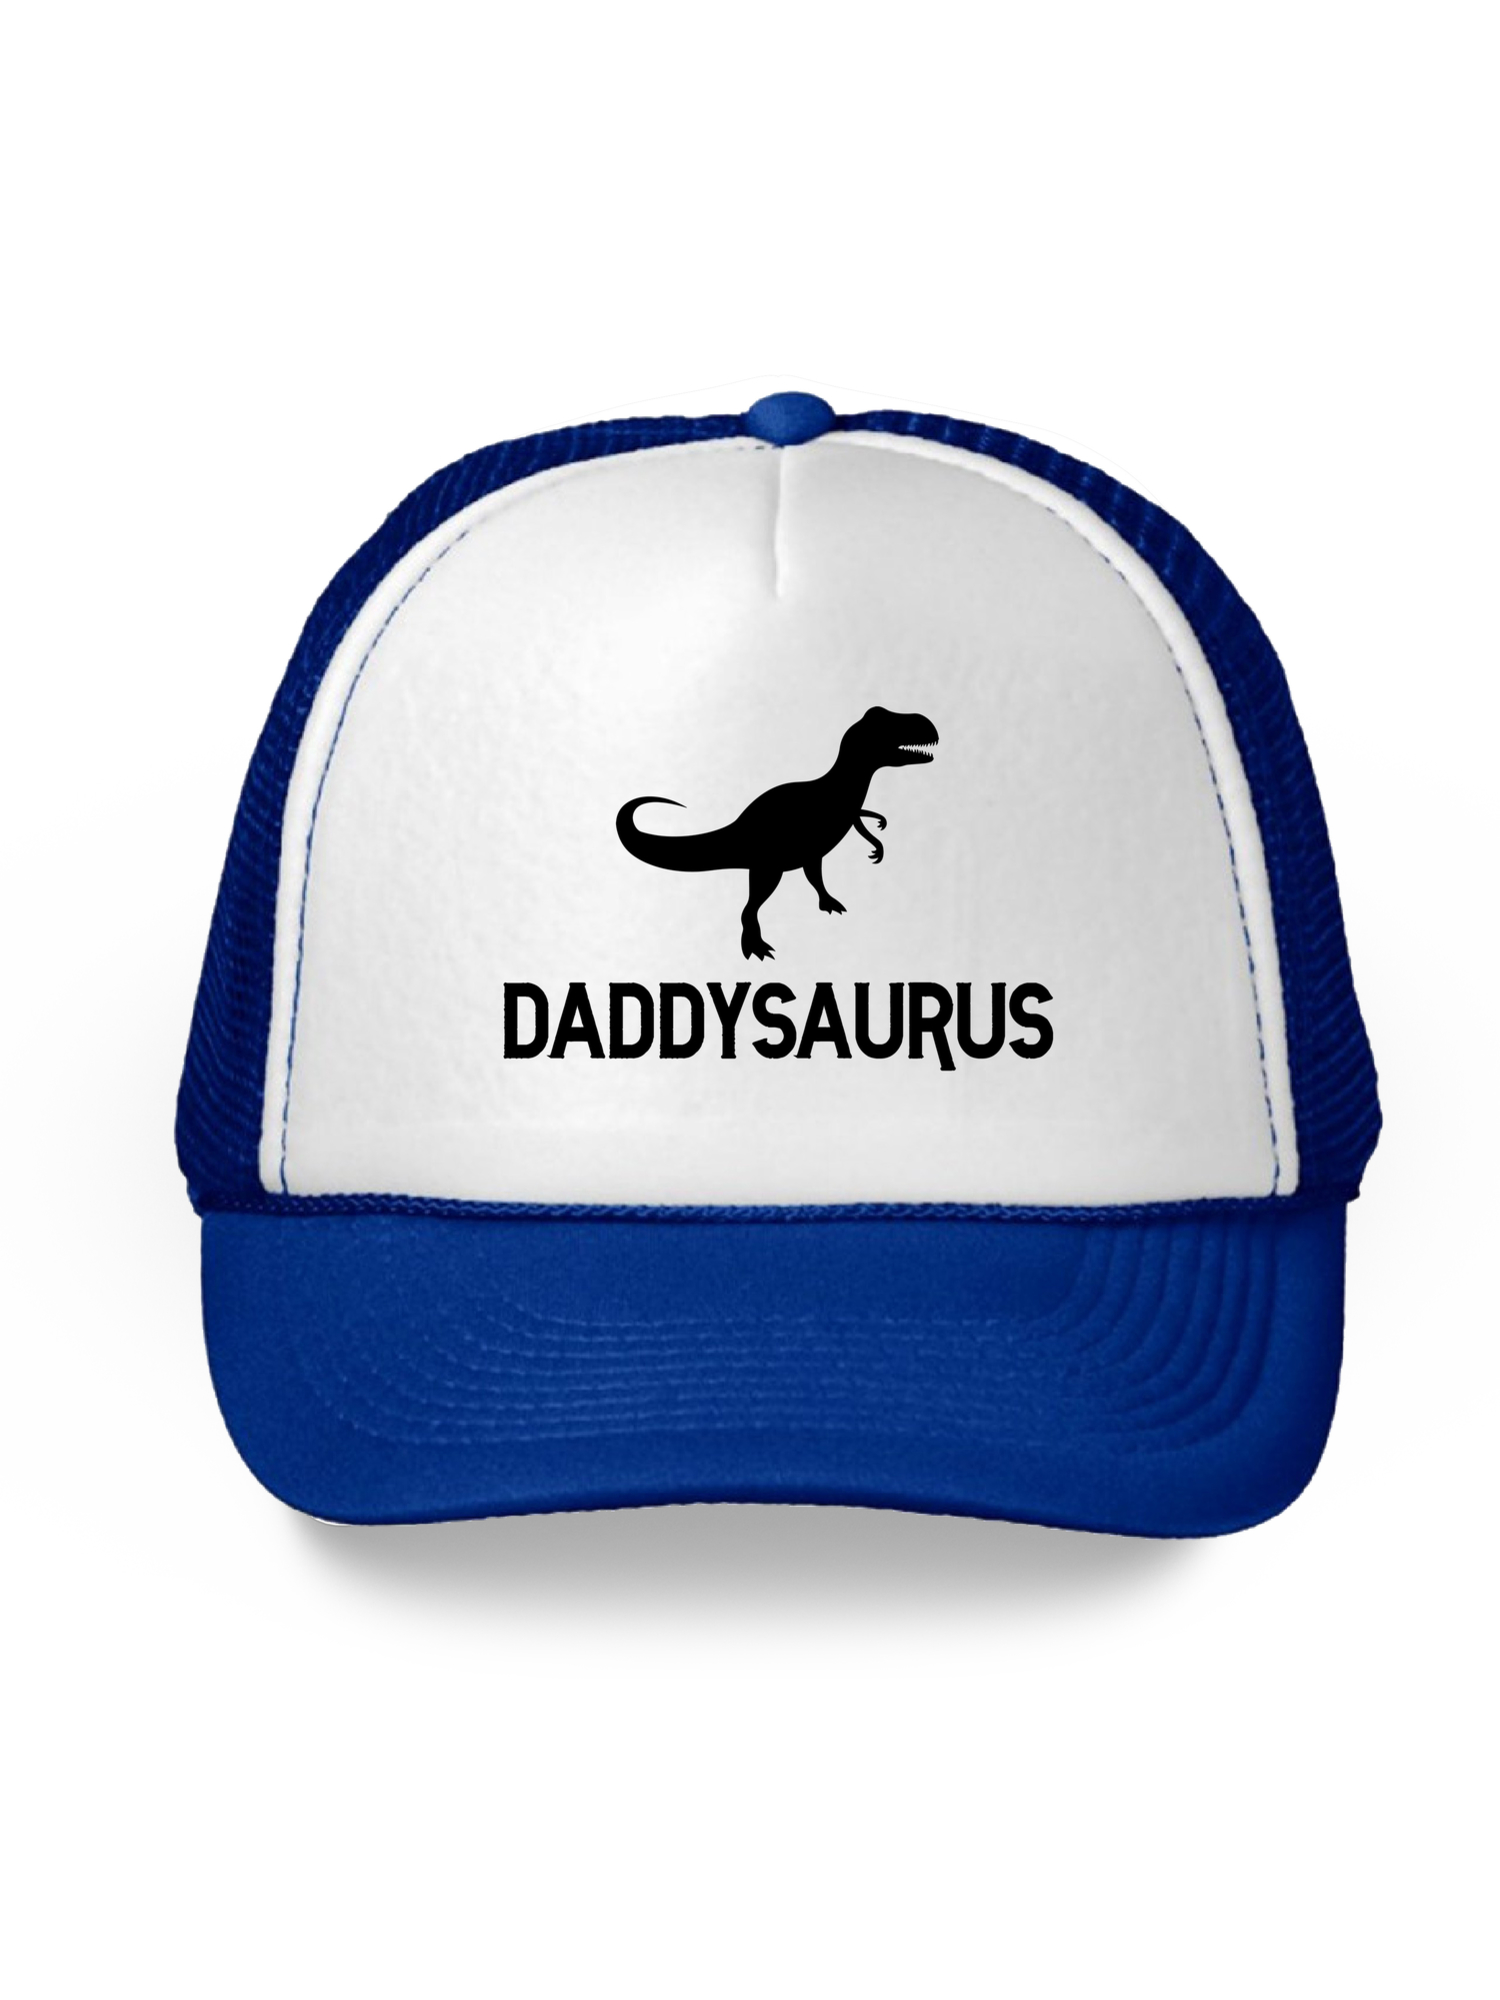 Awkward Styles Daddysaurus Hat Dinosaur Dad Trucker Hat Funny Dad Gifts for Father's Day Geek Dad Snapback Hat Hat Accessories for Dad Dinosaur Gifts for Dad Father Trucker Hat Daddy Cap Funny Dad Hat - image 1 of 6